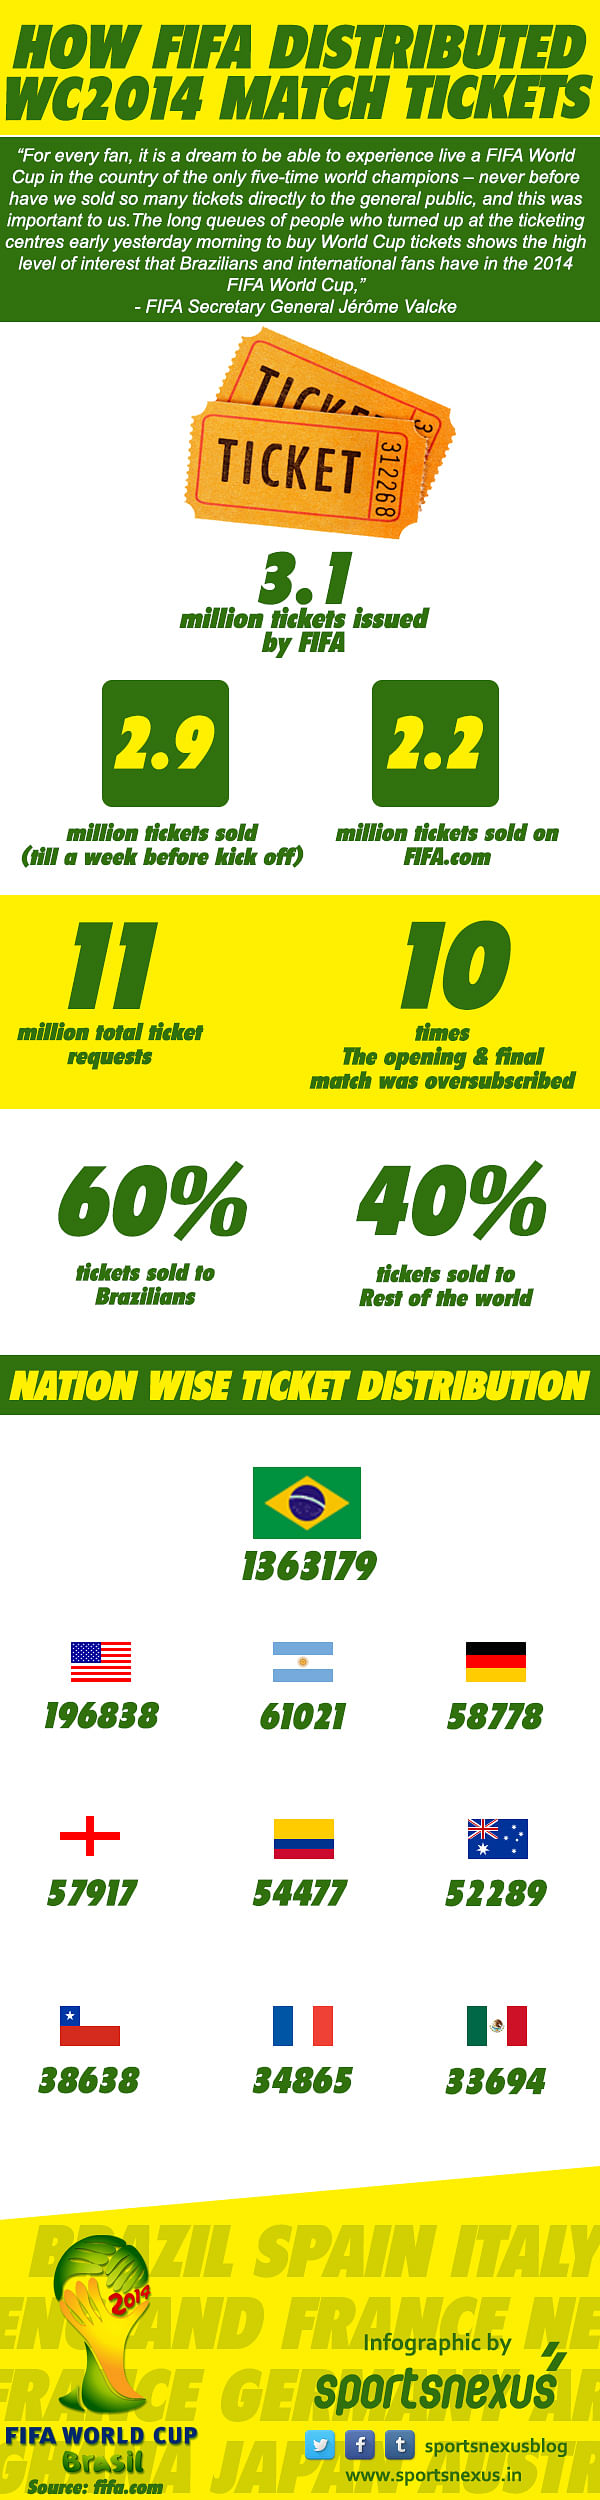 Top 10 countries present in Brazil for the 2014 FIFA World Cup